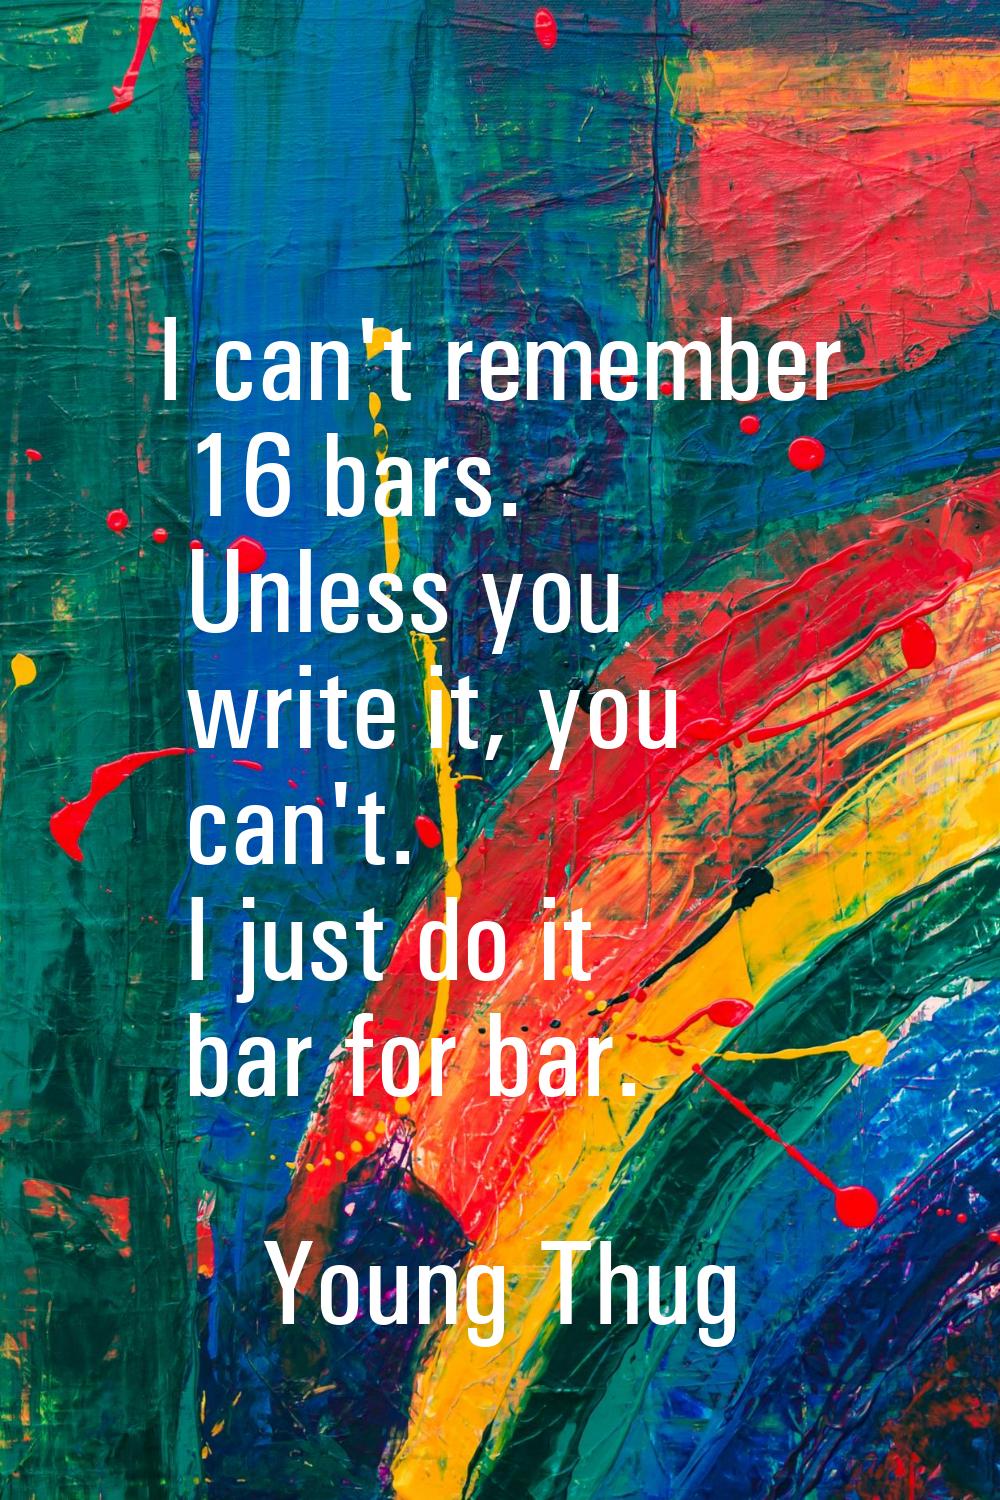 I can't remember 16 bars. Unless you write it, you can't. I just do it bar for bar.